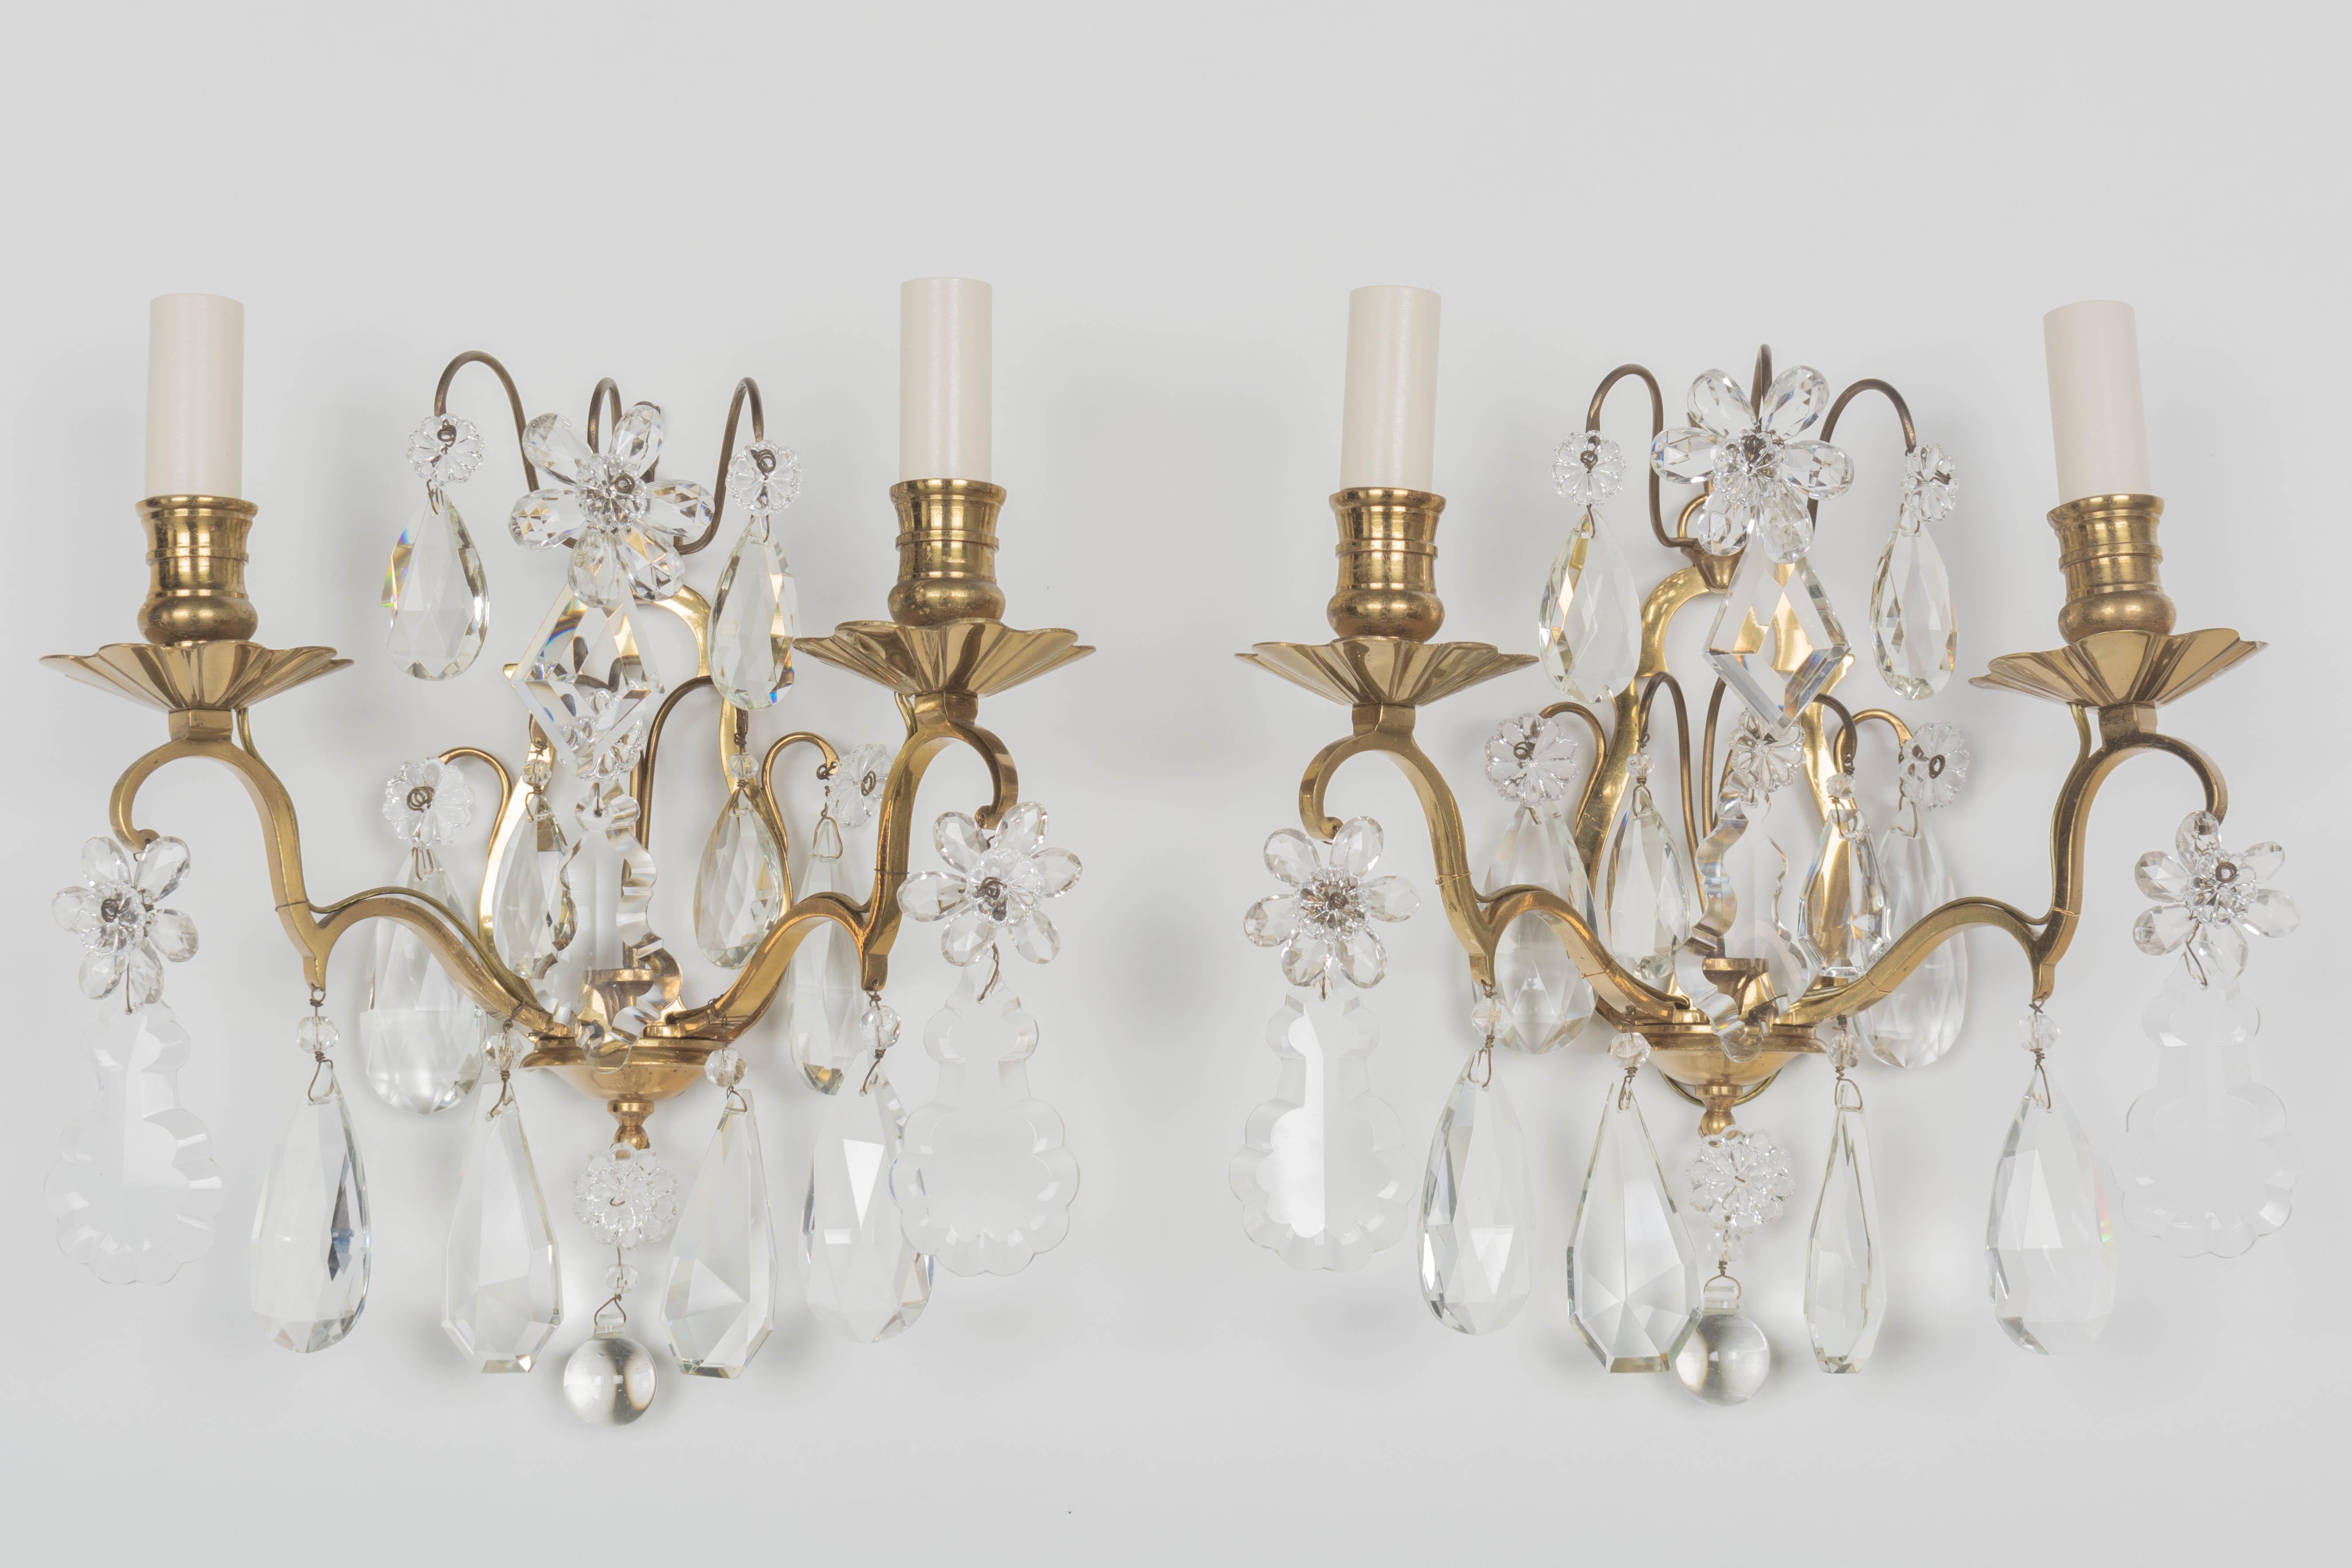 A pair of French Maison Baguès cast brass and crystal sconces. Good quality heavy casting with two scrolled candle arms and a variety of cut crystal teardrop pendalogues and faceted crystal flowers with rosettes. All original prisms. Rewired with